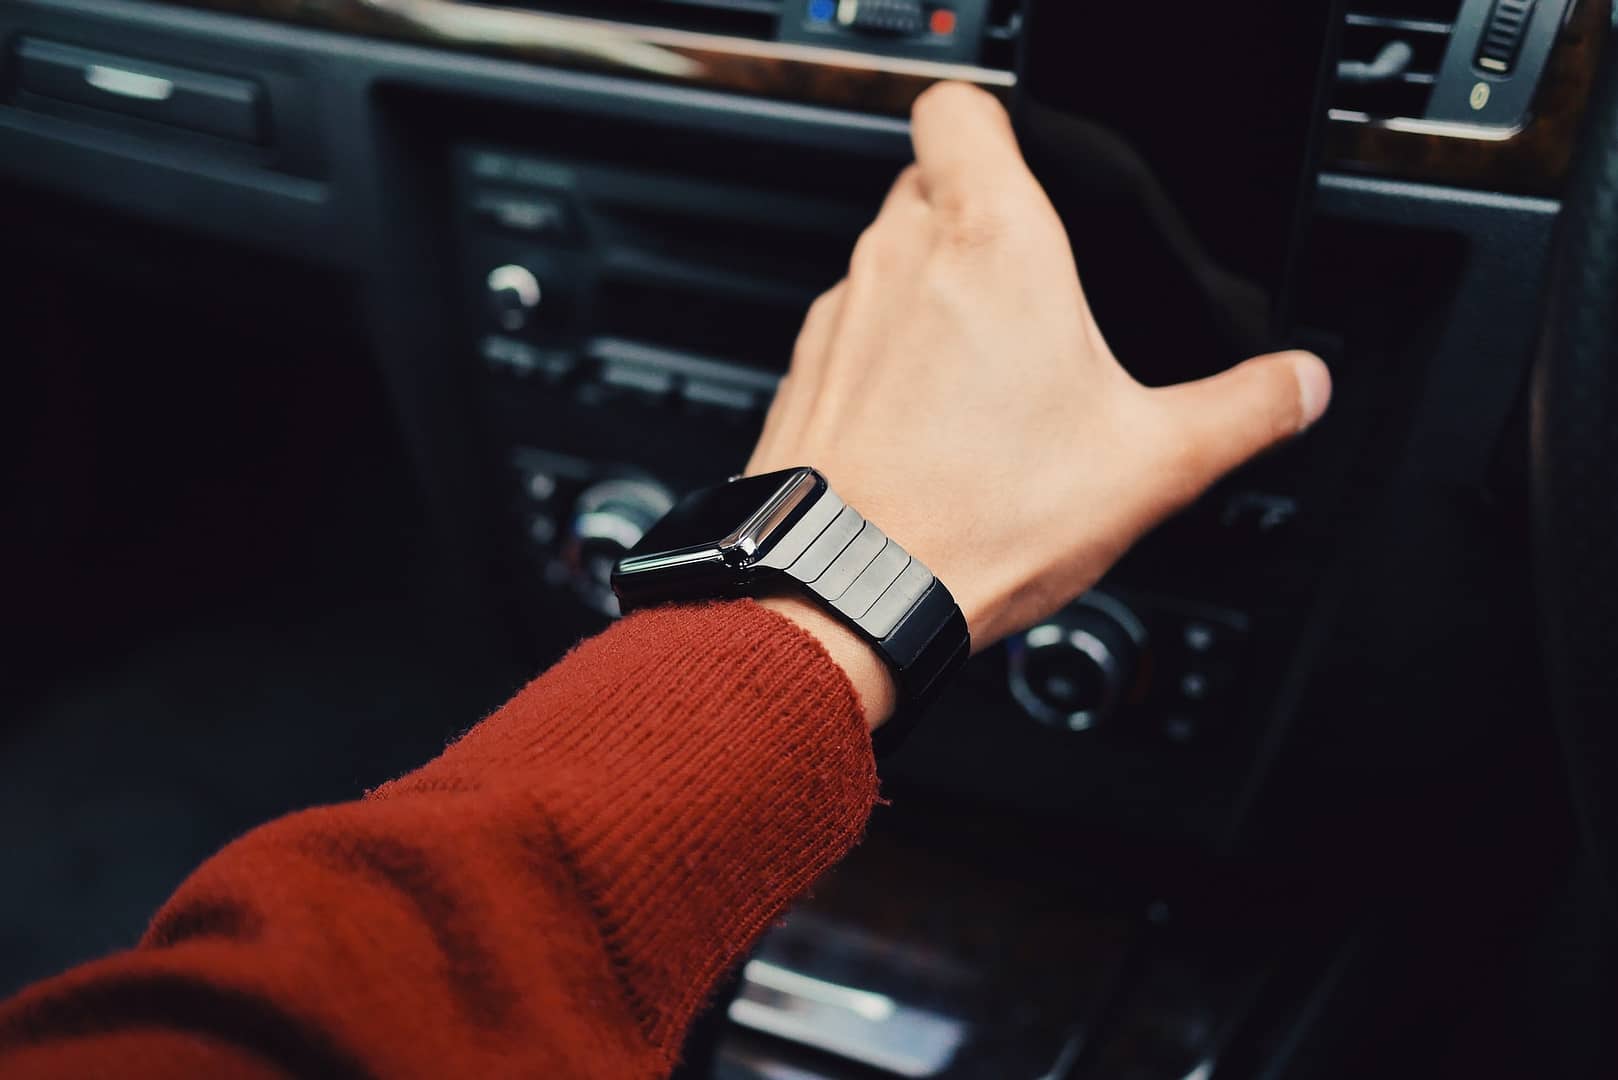 Someone in a car with a phone and smart watch